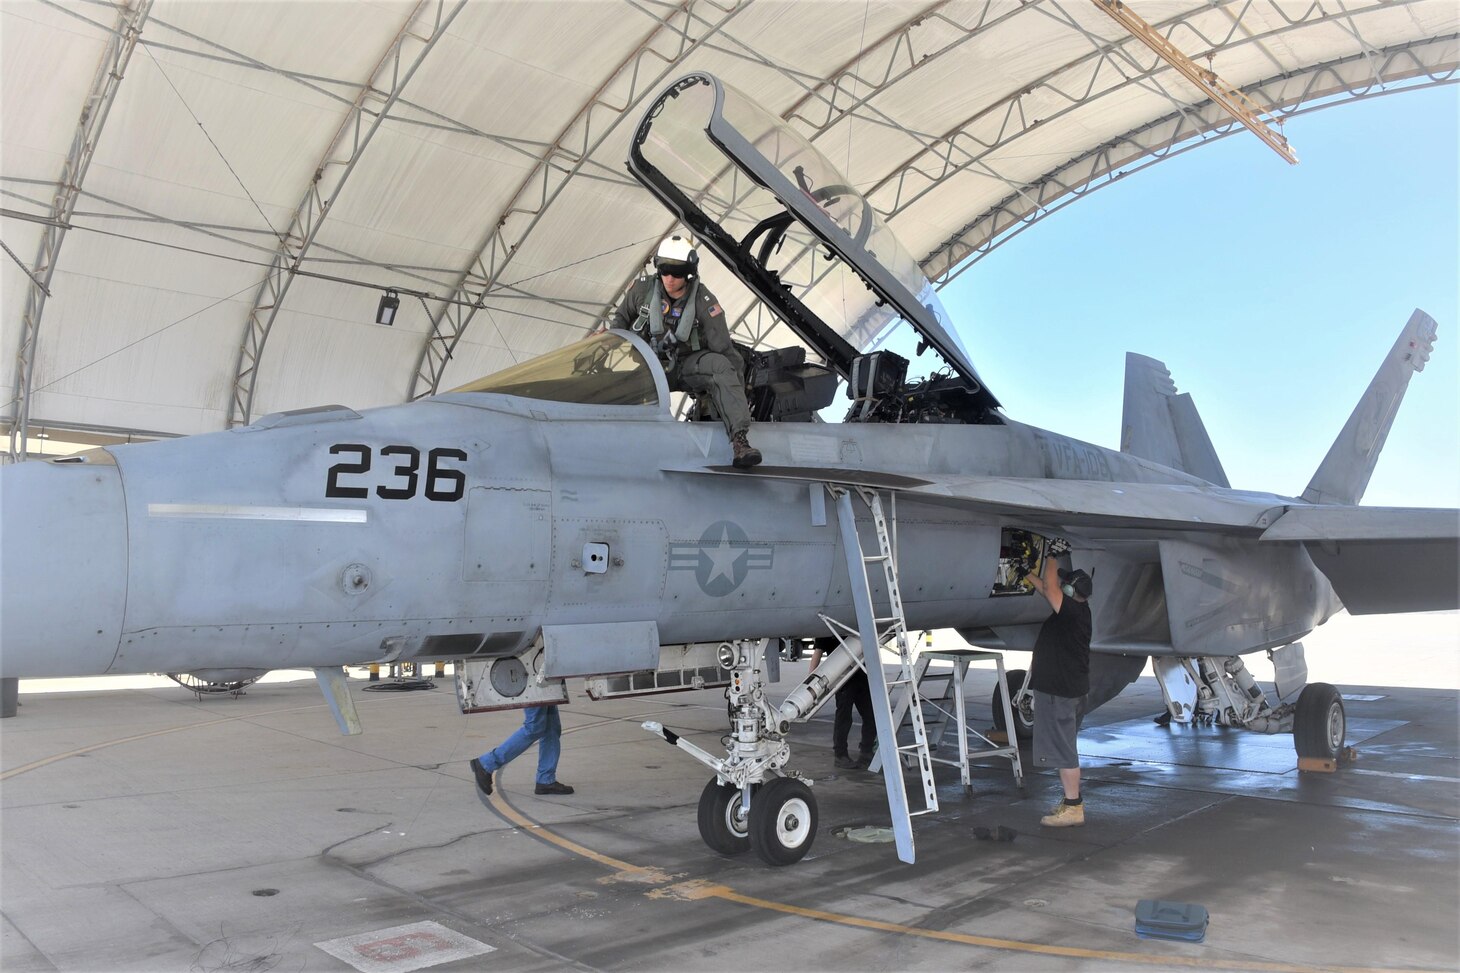 The first F/A-18 Super Hornet fighter aircraft to undergo the Service Life Modification (SLM) procedure at a naval aviation depot is pictured at the FRCSW testline June 29. The aircraft, assigned to Strike Fighter Squadron (VFA) 106, will undergo induction for the SLM that will extend the airframe’s flight hours from 6,000 to 7,500. The procedure is estimated to take about 17 months.